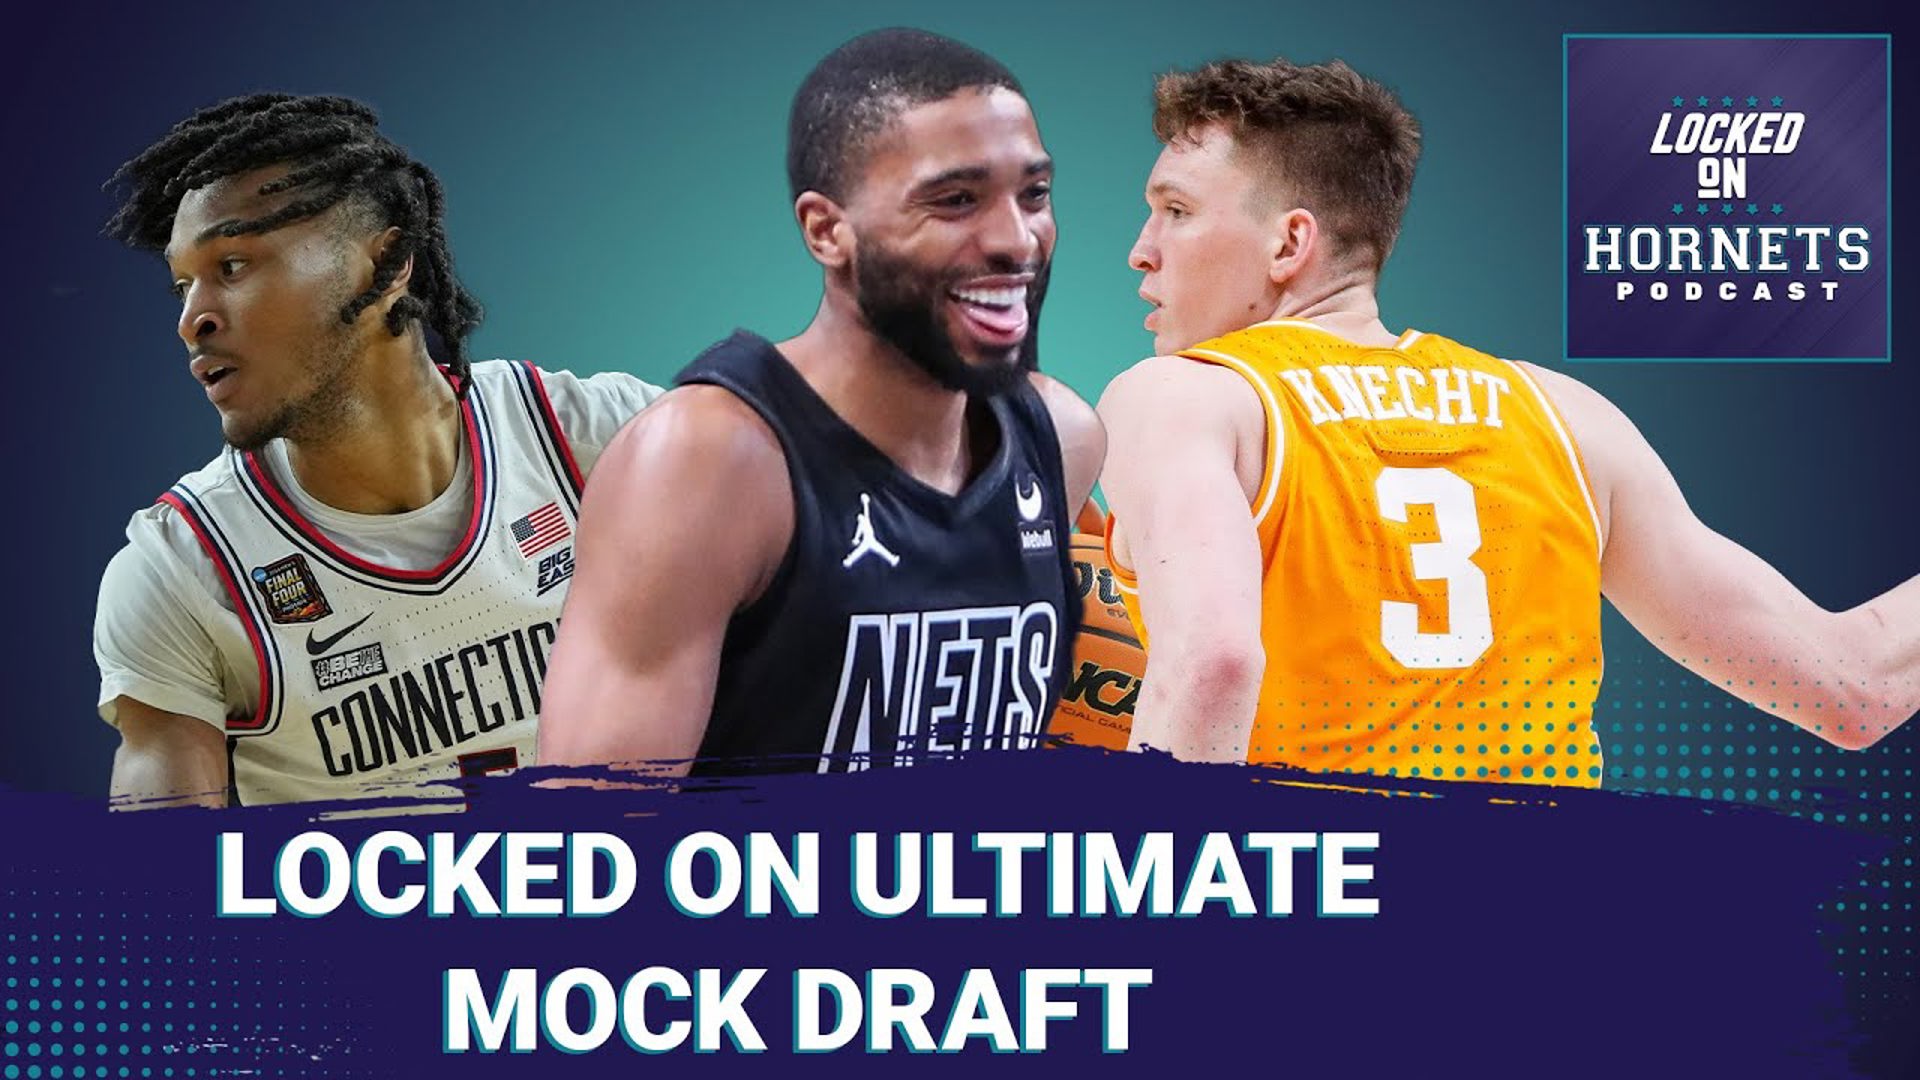 We're On the Clock! The Charlotte Hornets' Ultimate Mock Draft Dilemma